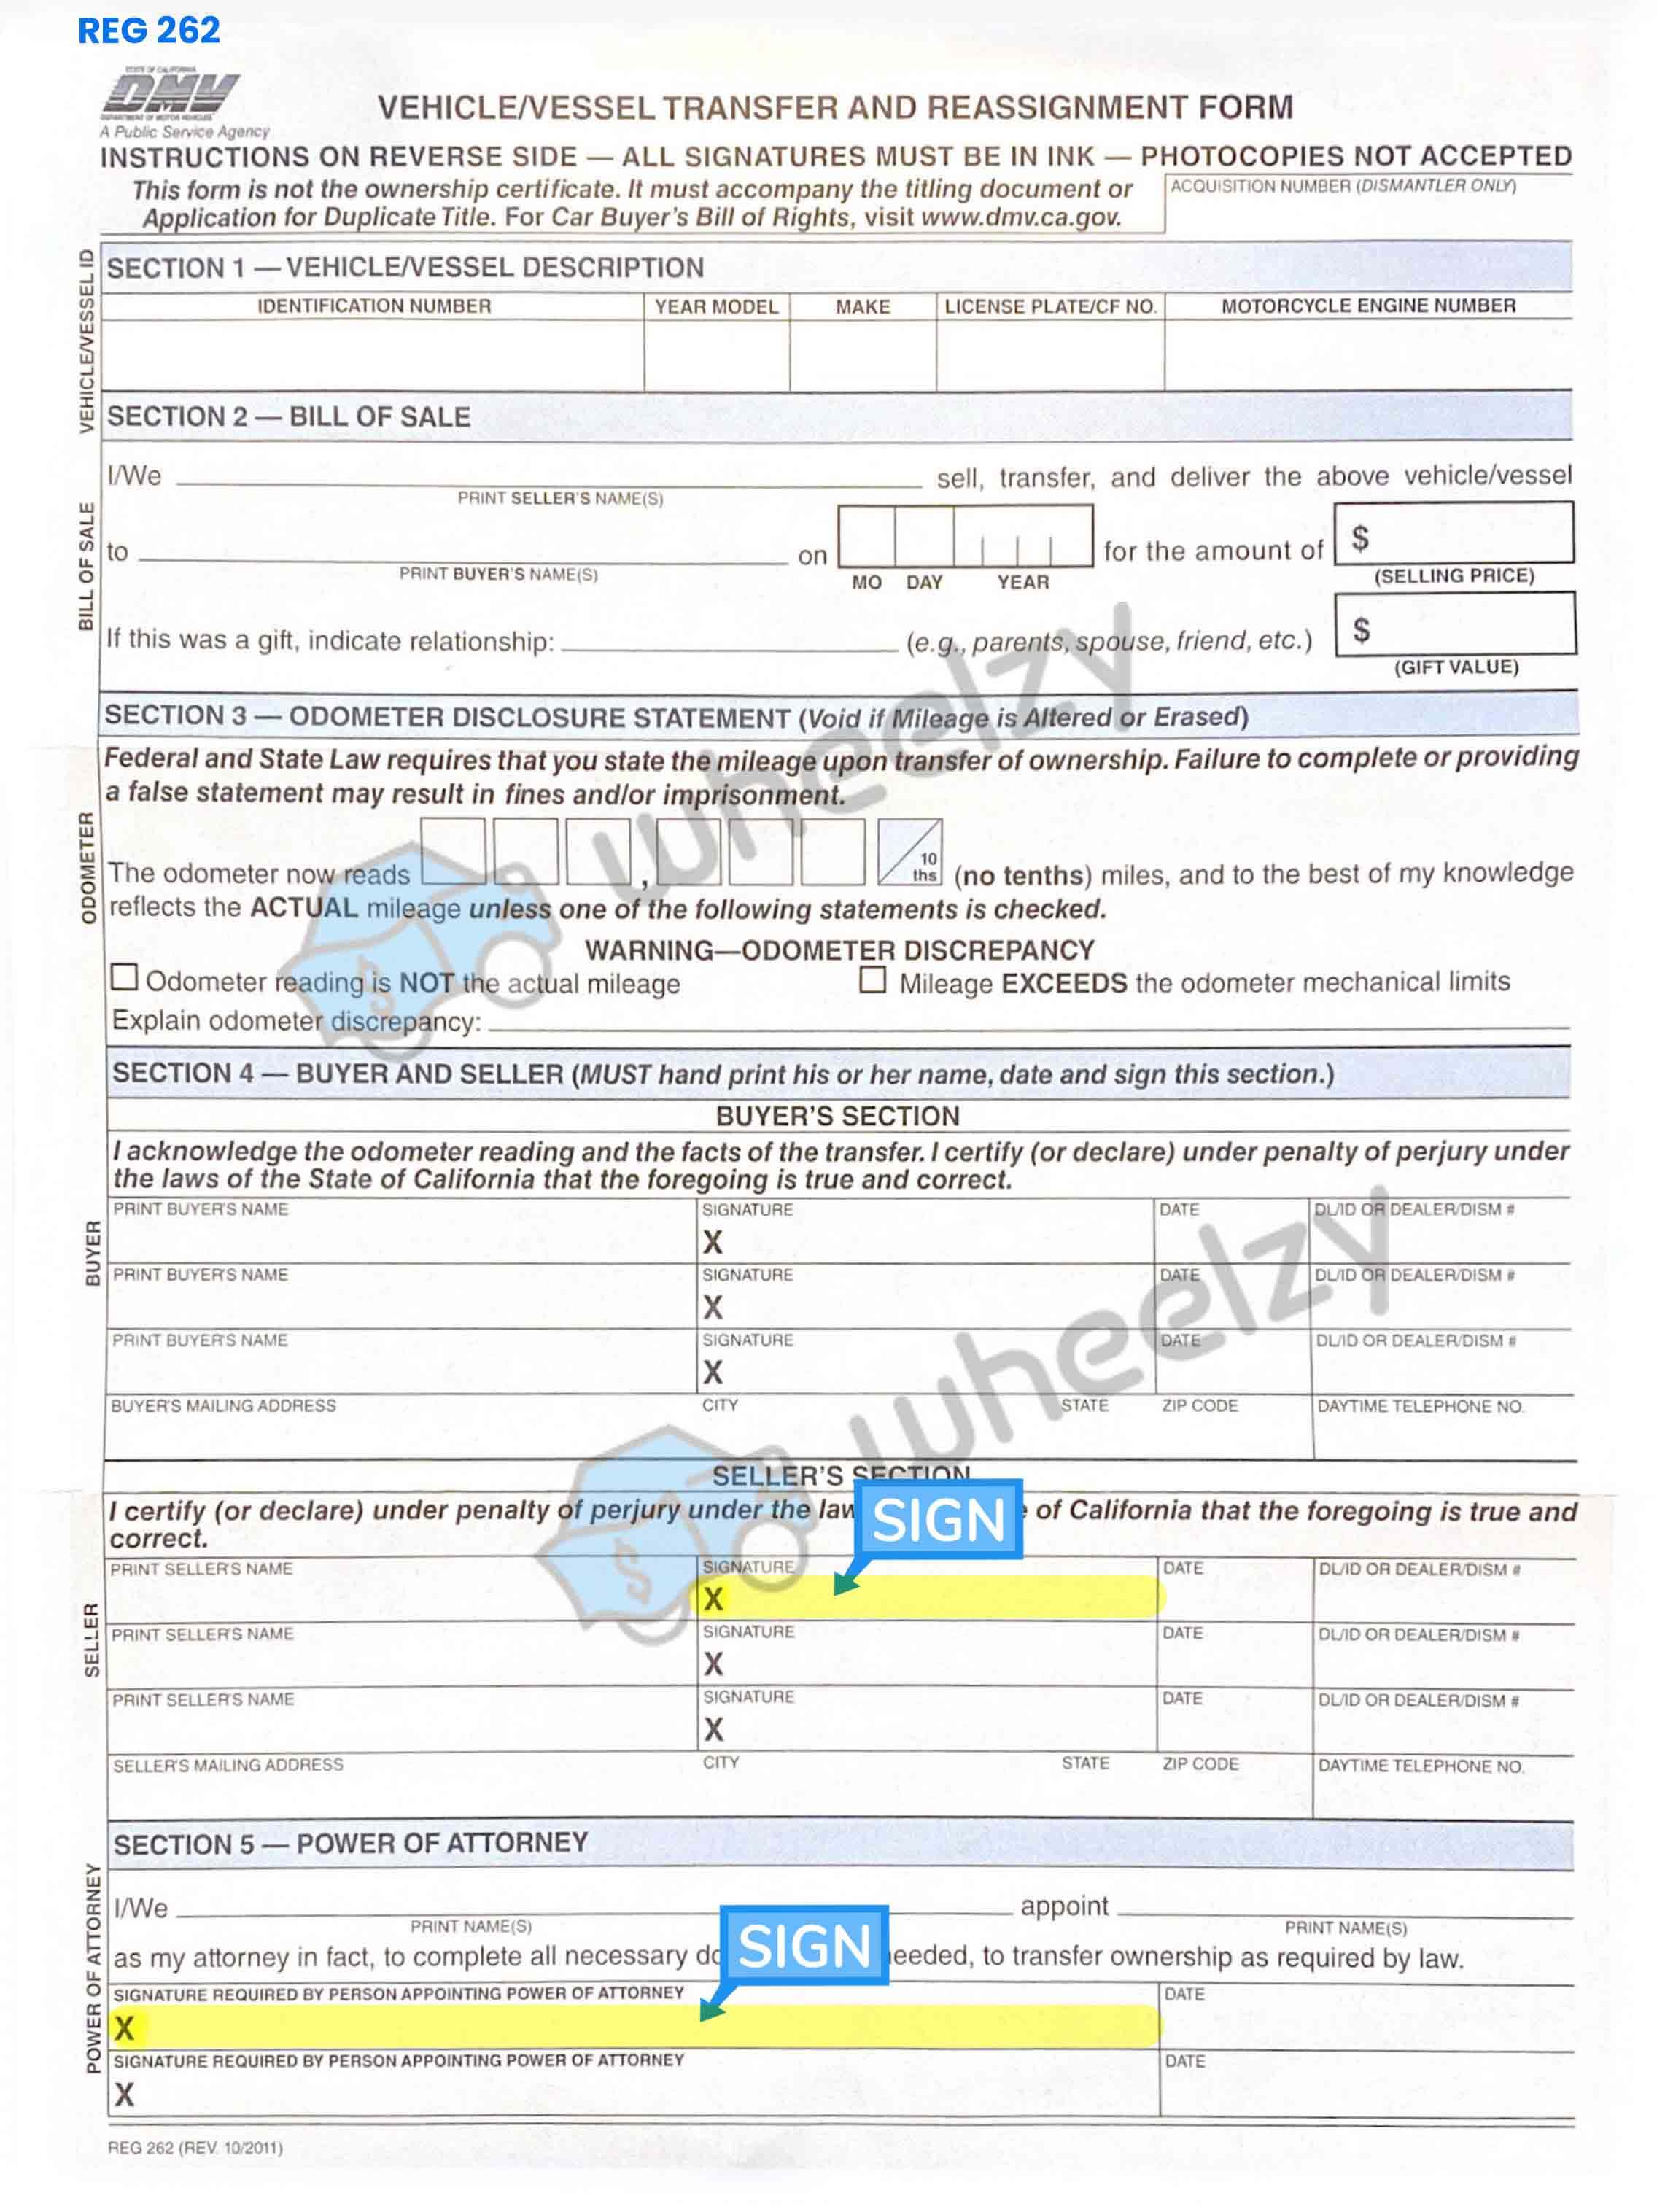 How to Sign Your REG Forms in California